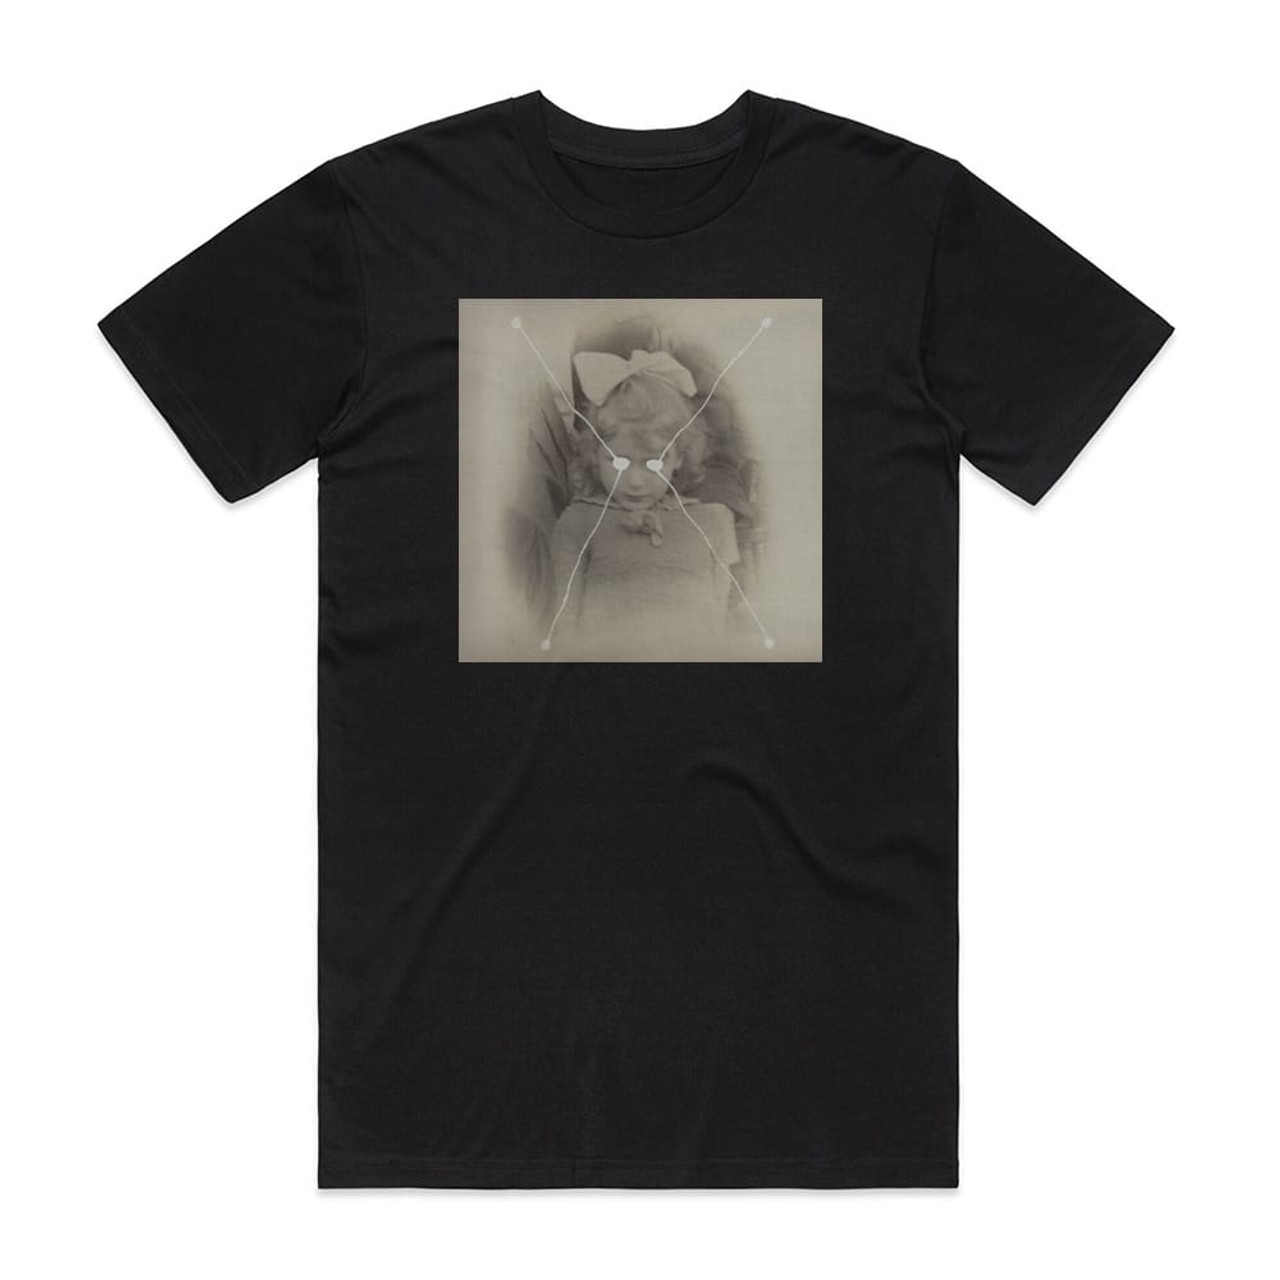 Current The Light Is Leaving Us All Album Cover T-Shirt Black